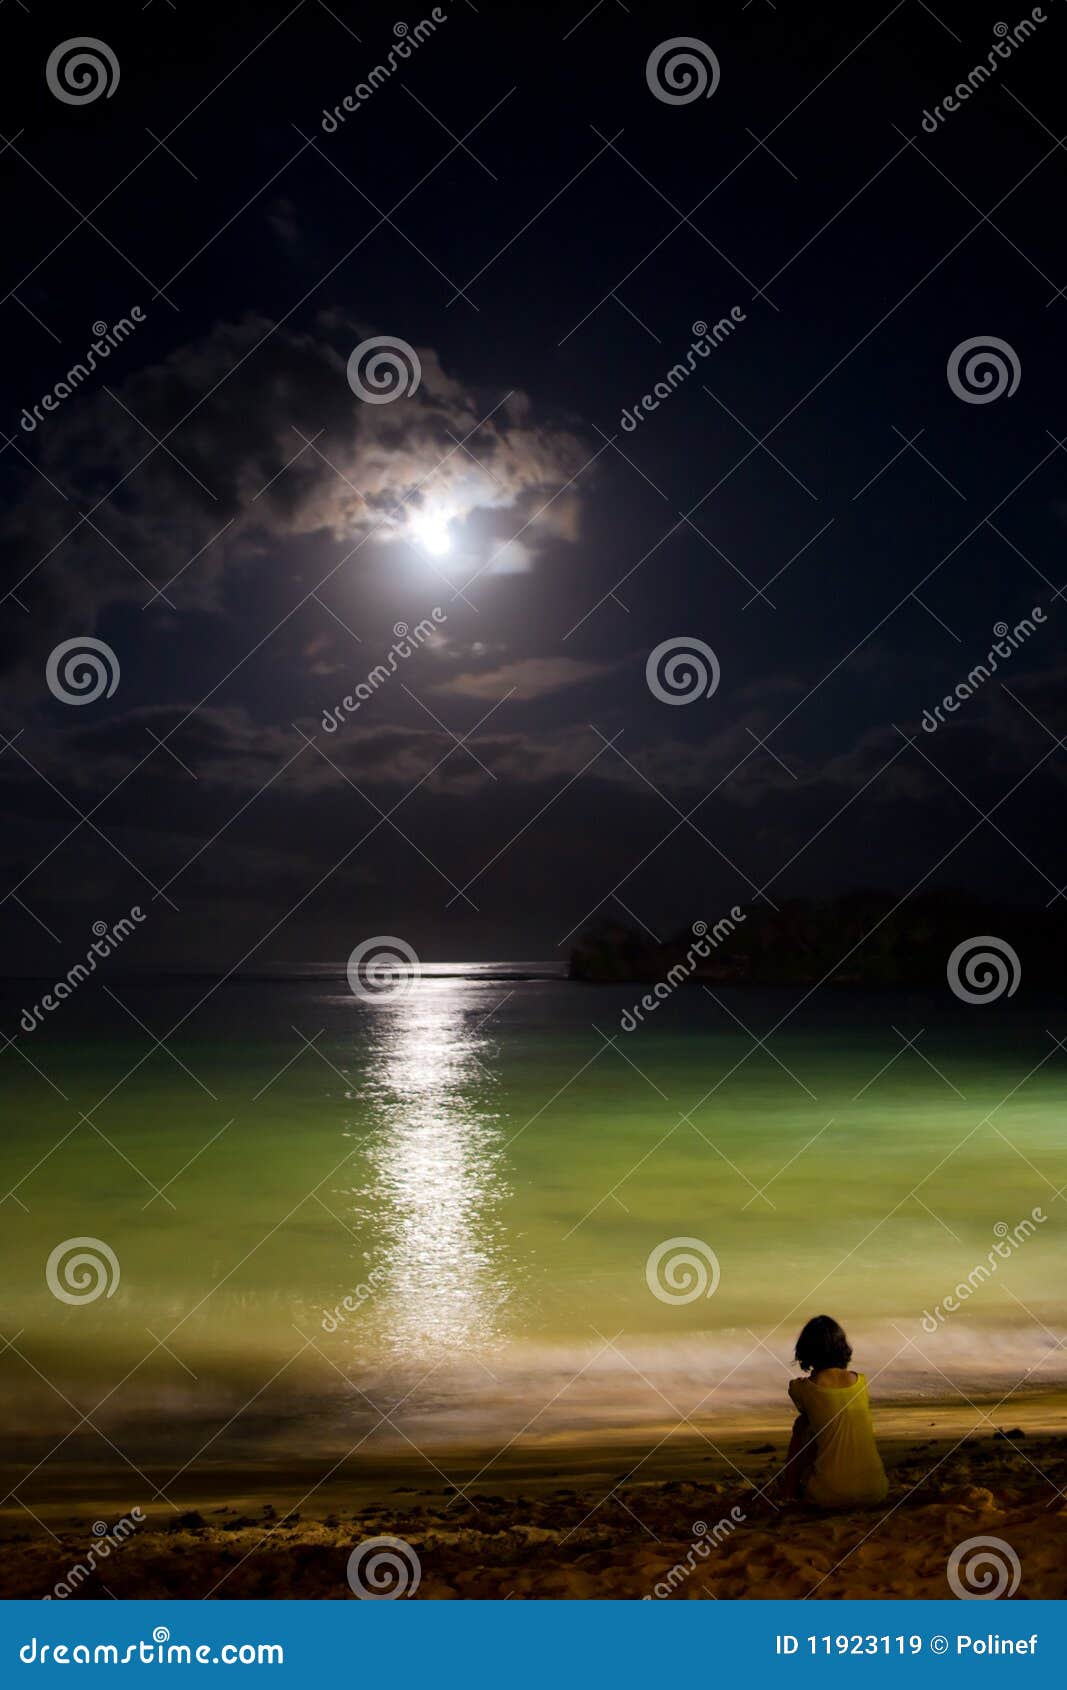 solitude at night ocean with moon